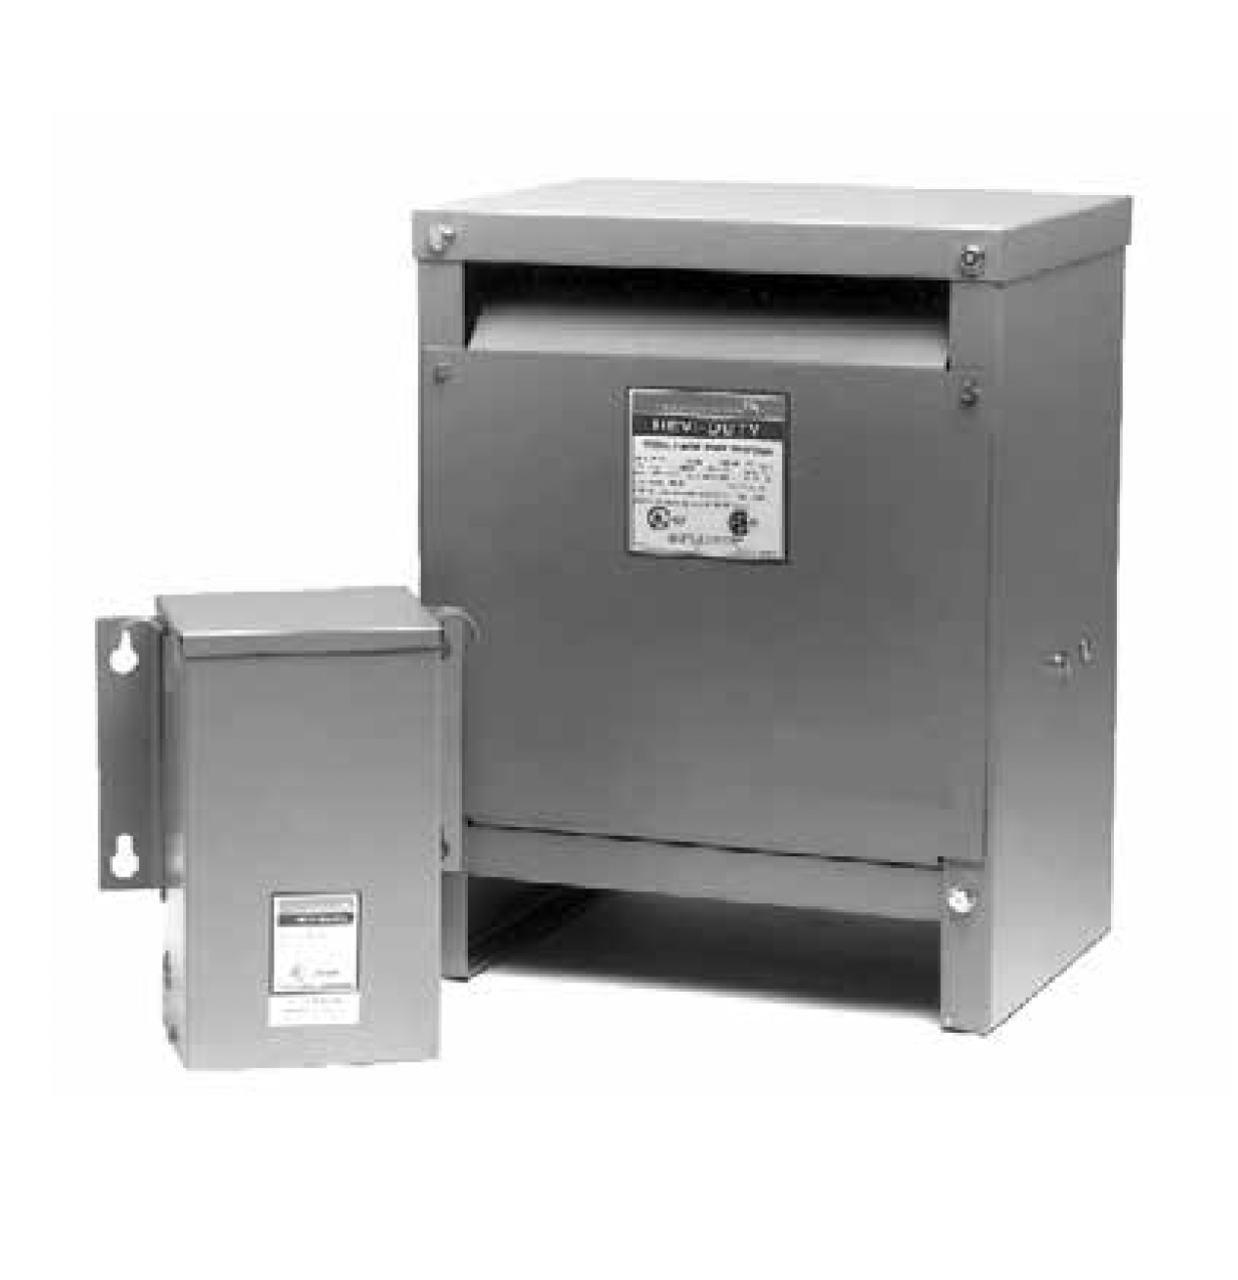 SolaHD Emerson - DT651H27S Dry-Type Distribution Transformers